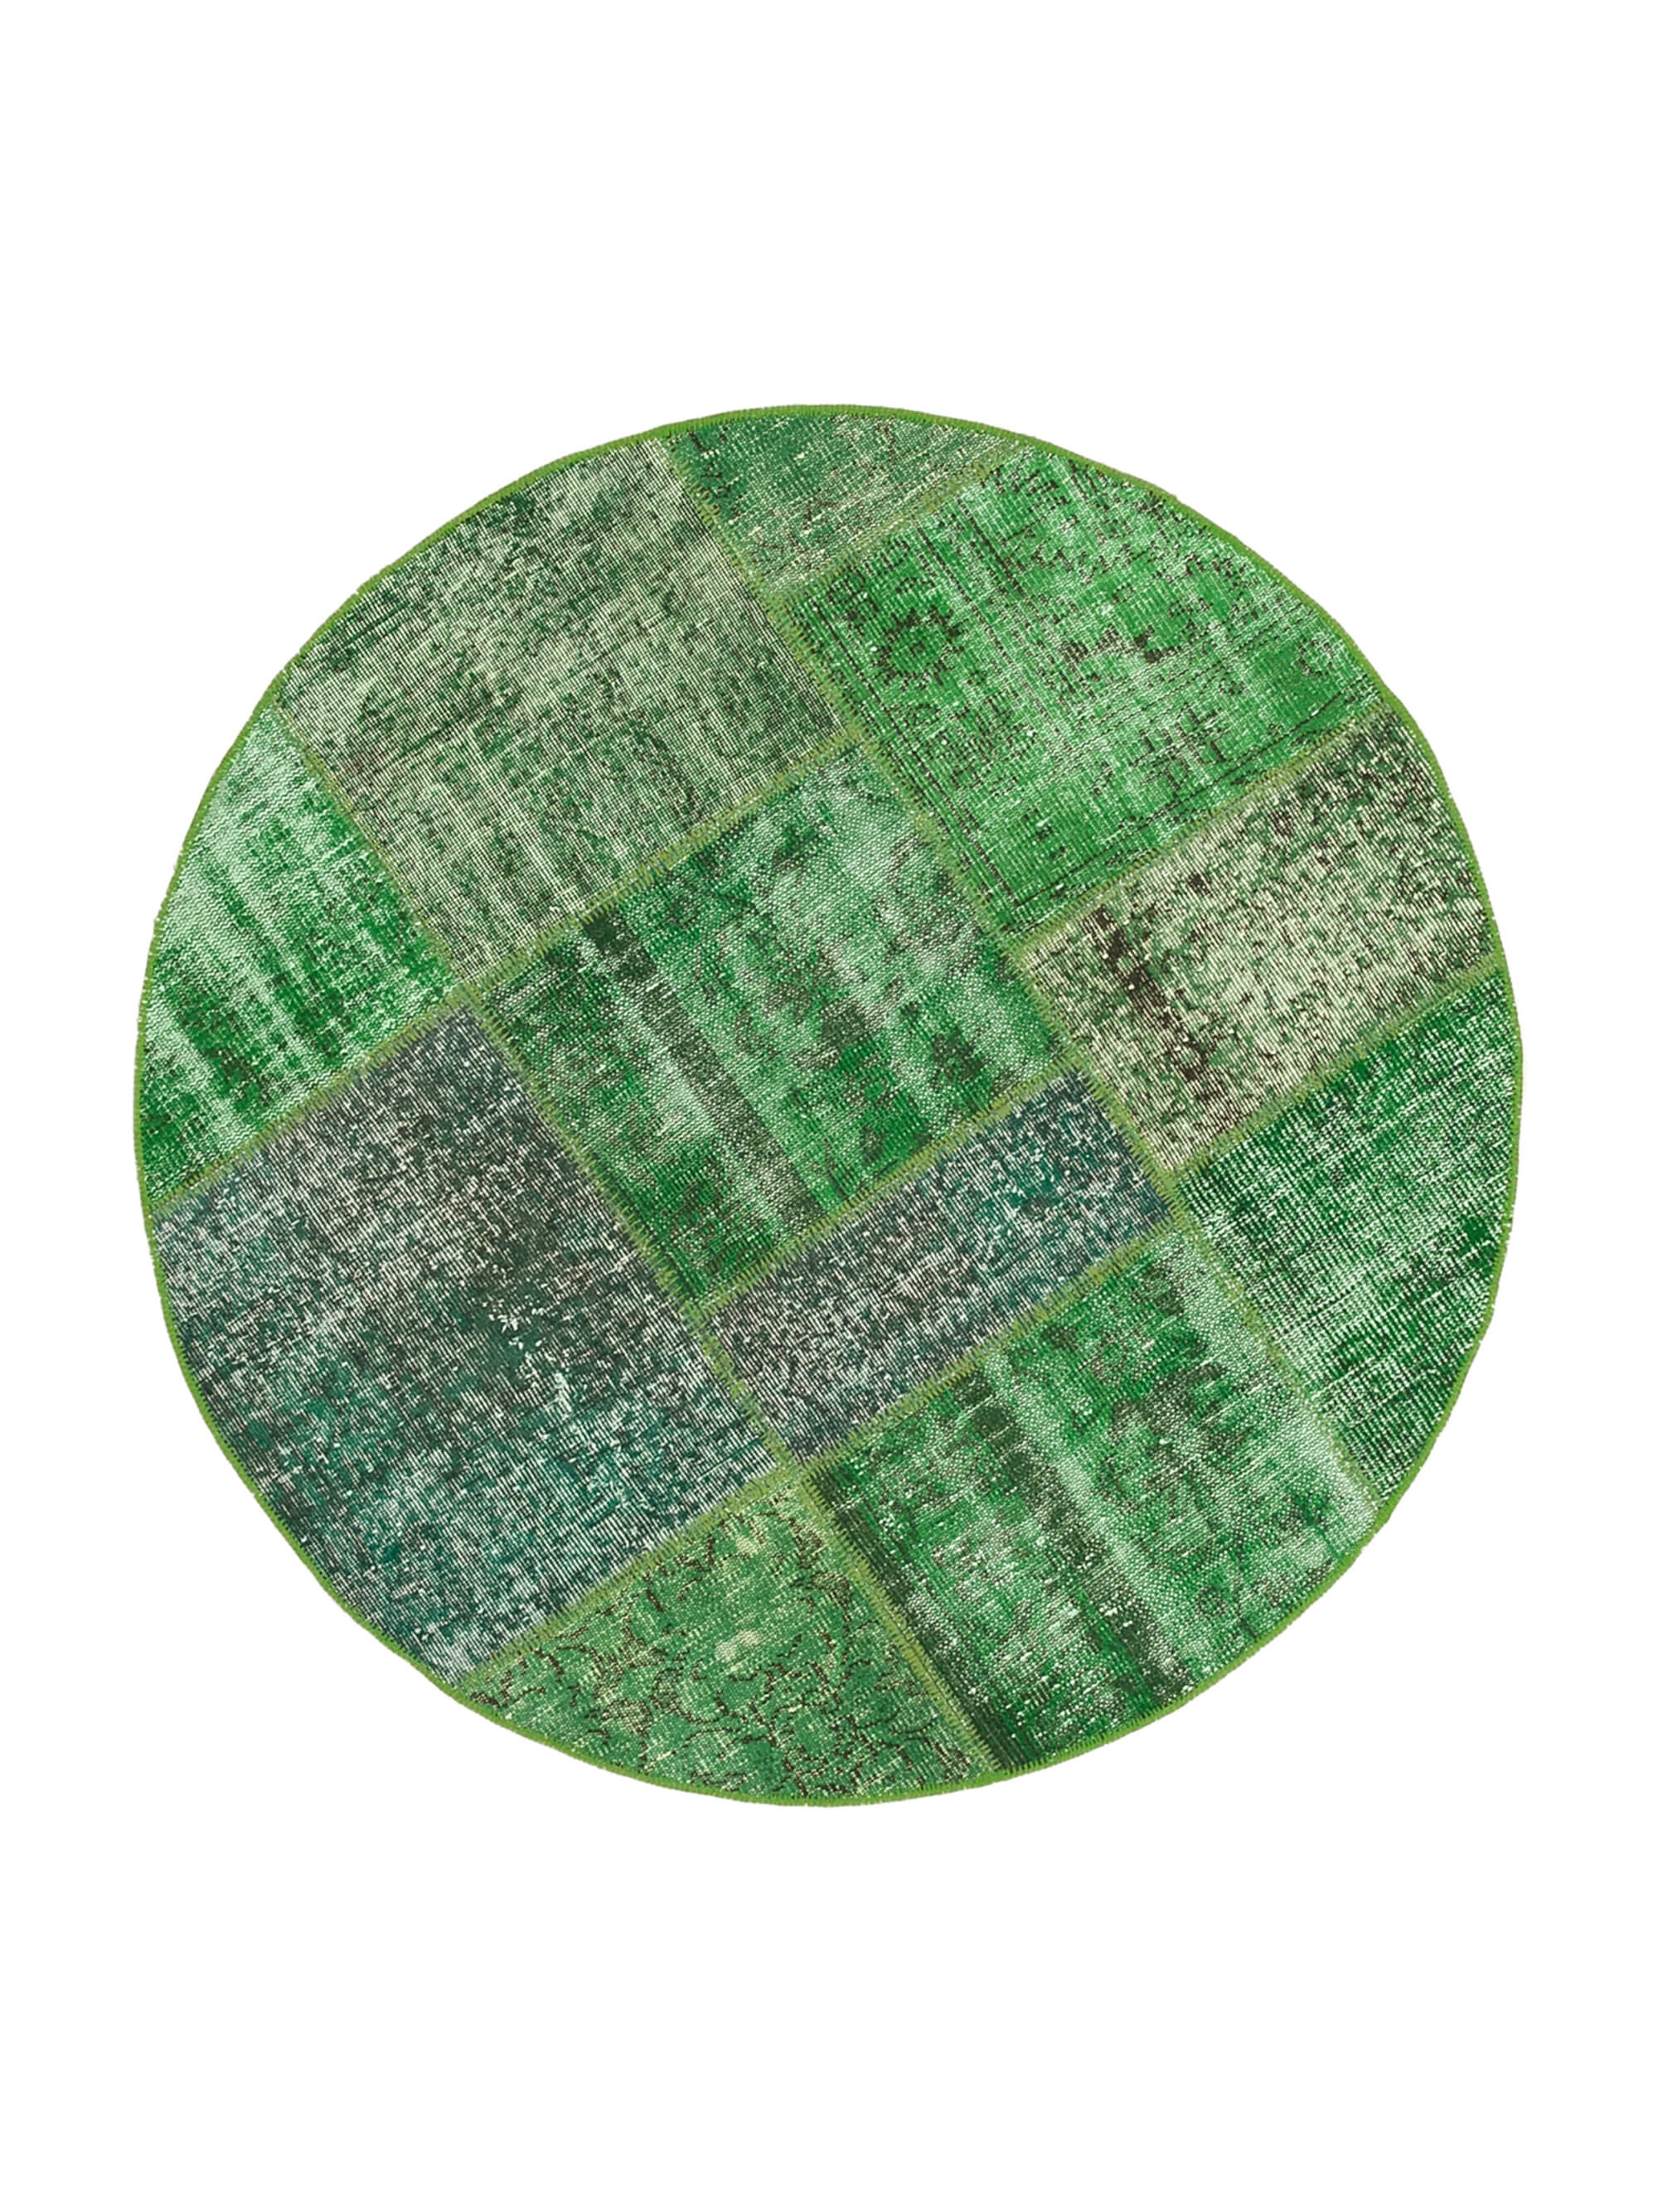 E179dd3f6a56befe140a6181ed2c9139 RC 29067 1 GREEN PATCHWORK RUGS 